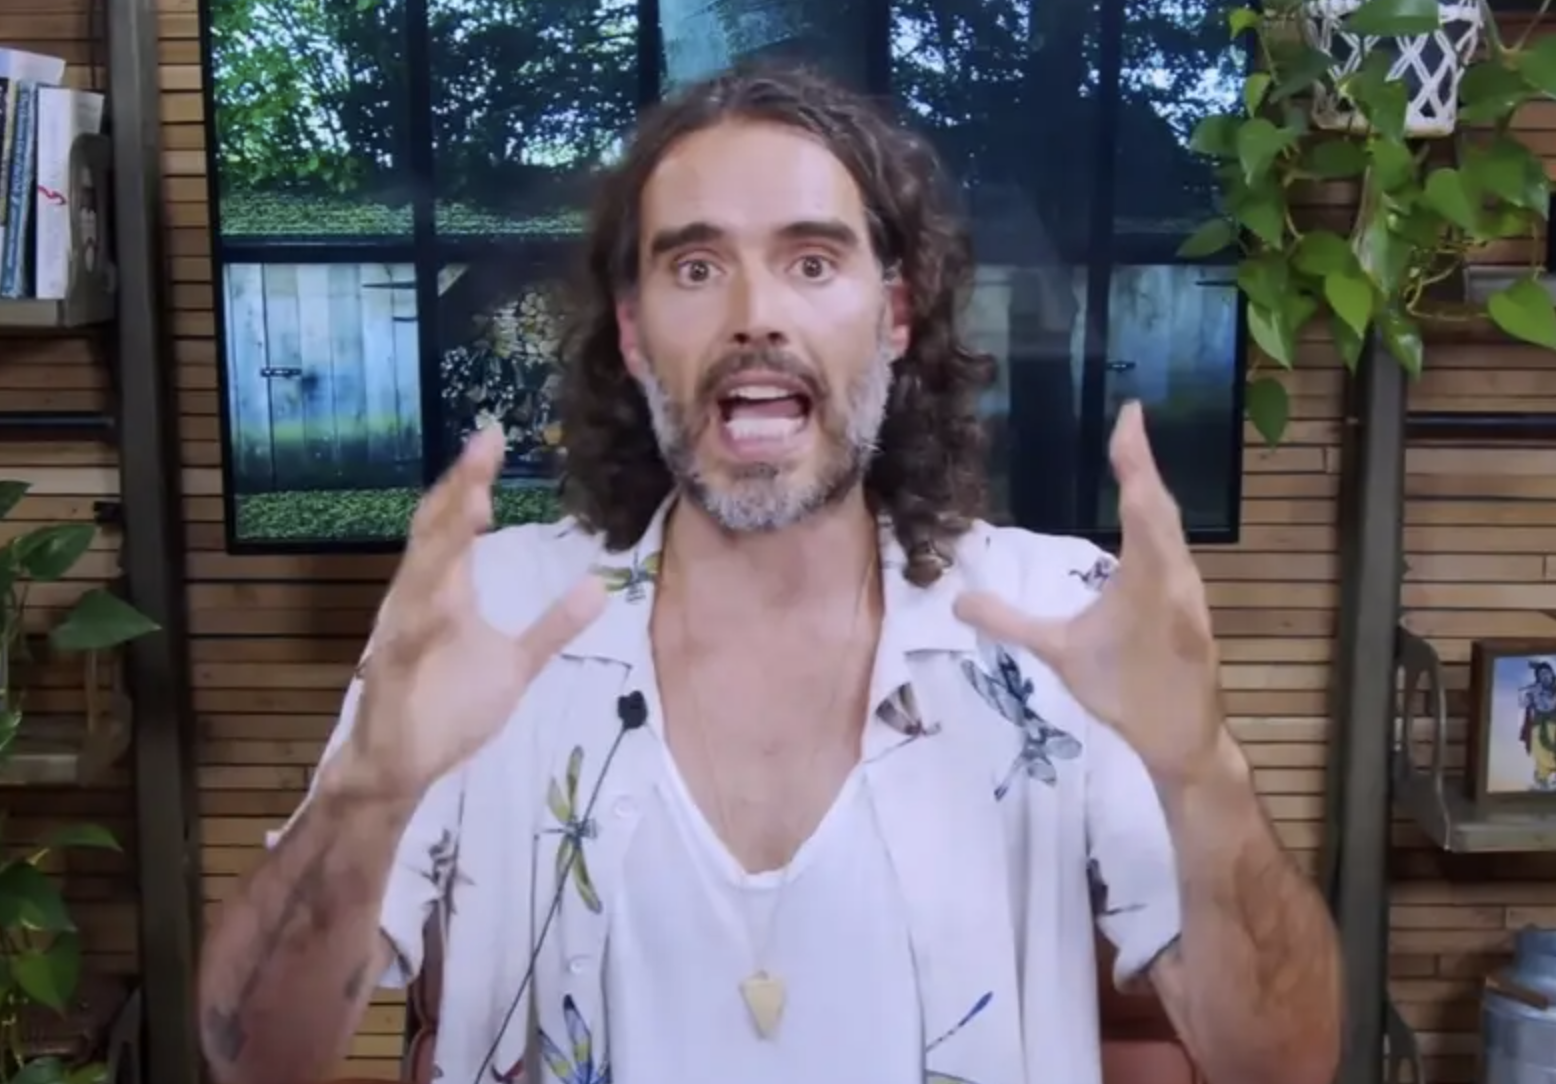 Screenshot of Russell speaking and gesturing with his hands